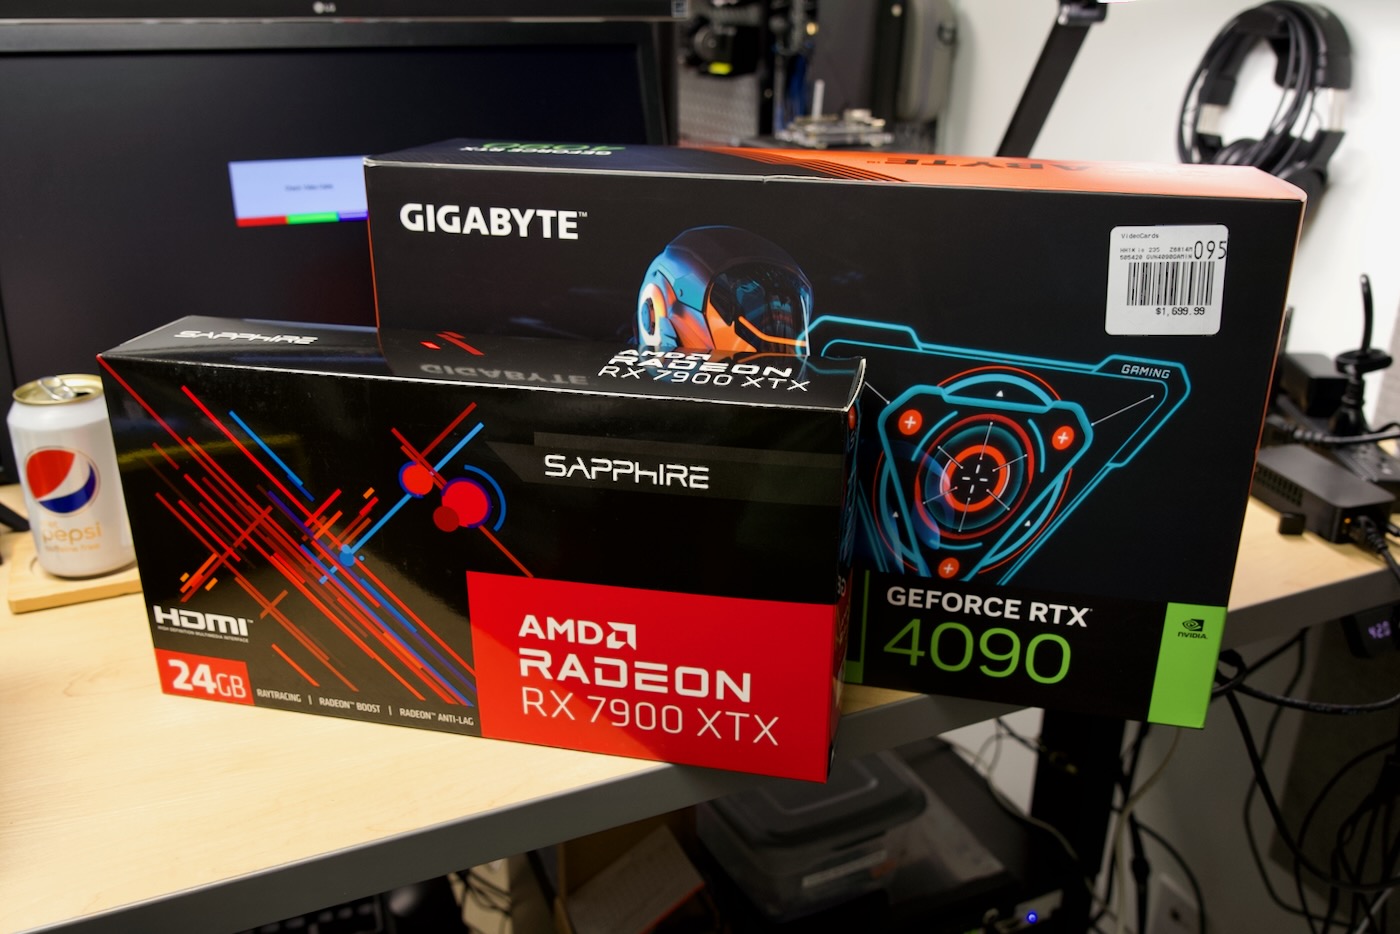 AMD RX 7900 XTX Reference Sapphire edition versus Nvidia RTX 4090 Gigabyte boxes